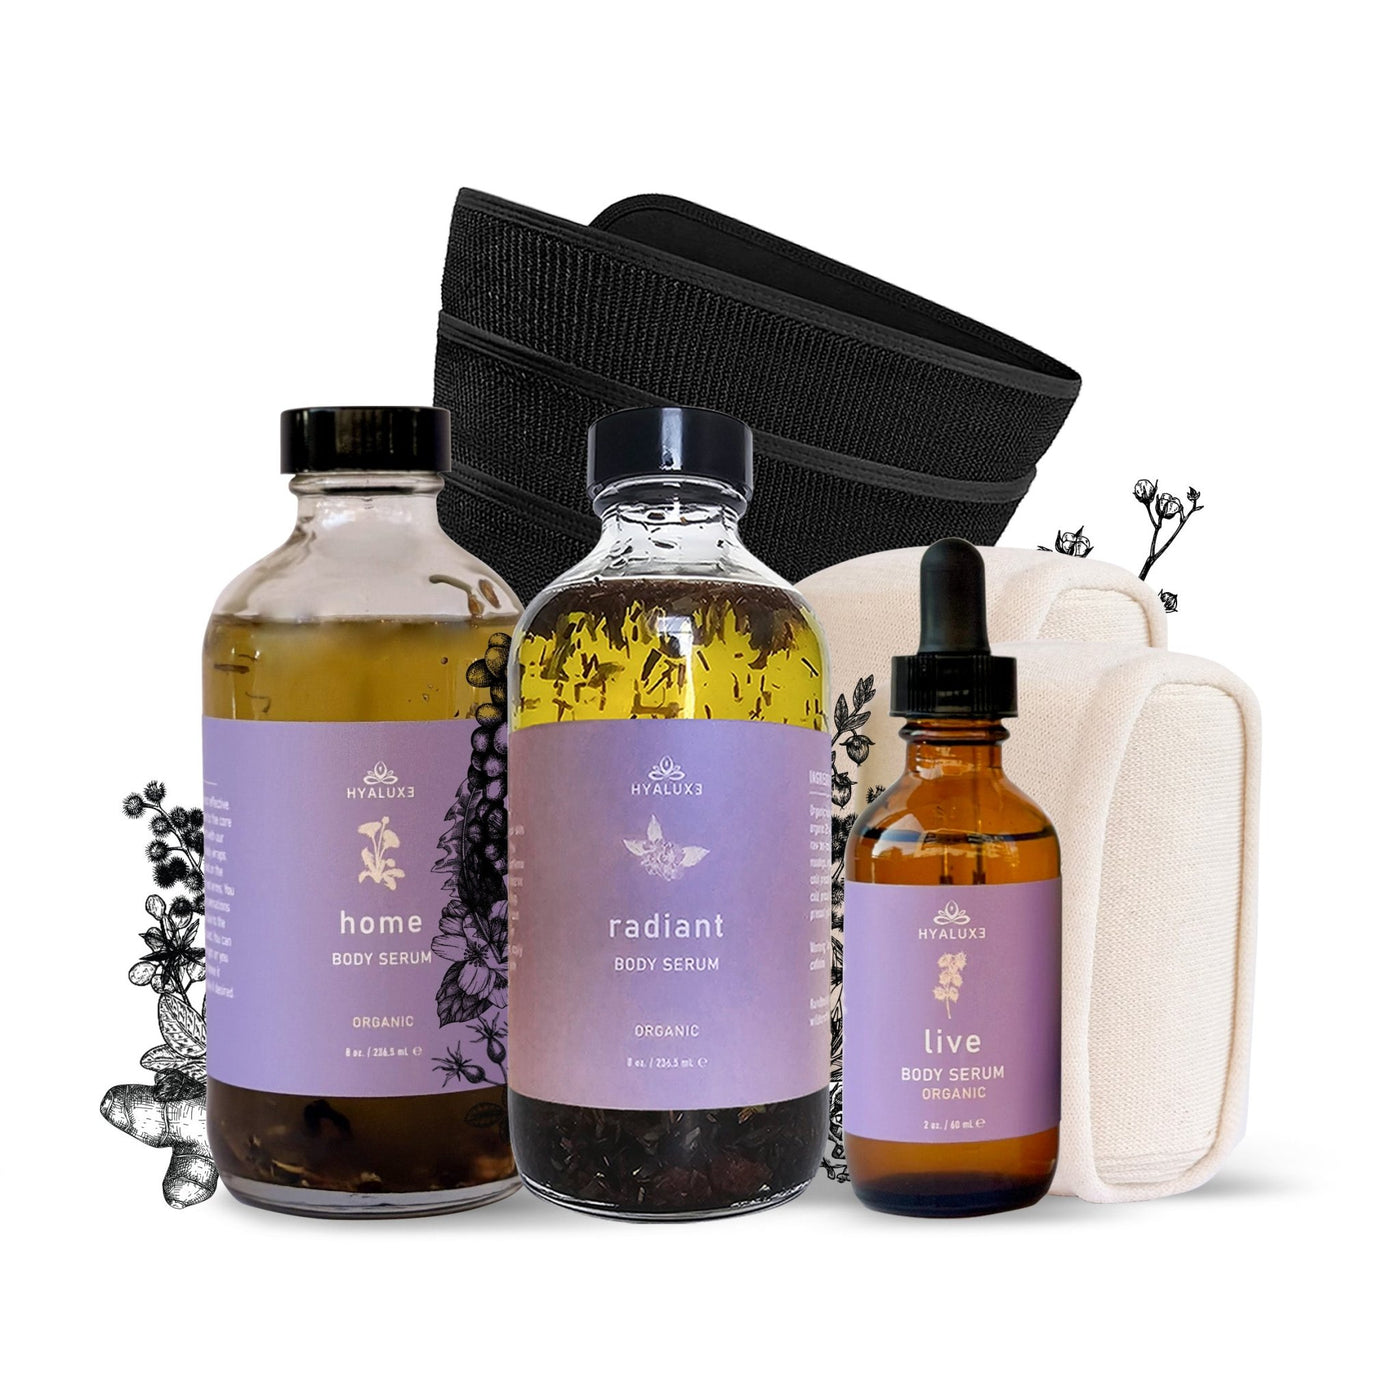 Triple Enhanced Castor Oil Serum Bundle (with Benefit Enhancement wrap and cotton body wraps) - Hyaluxe Body